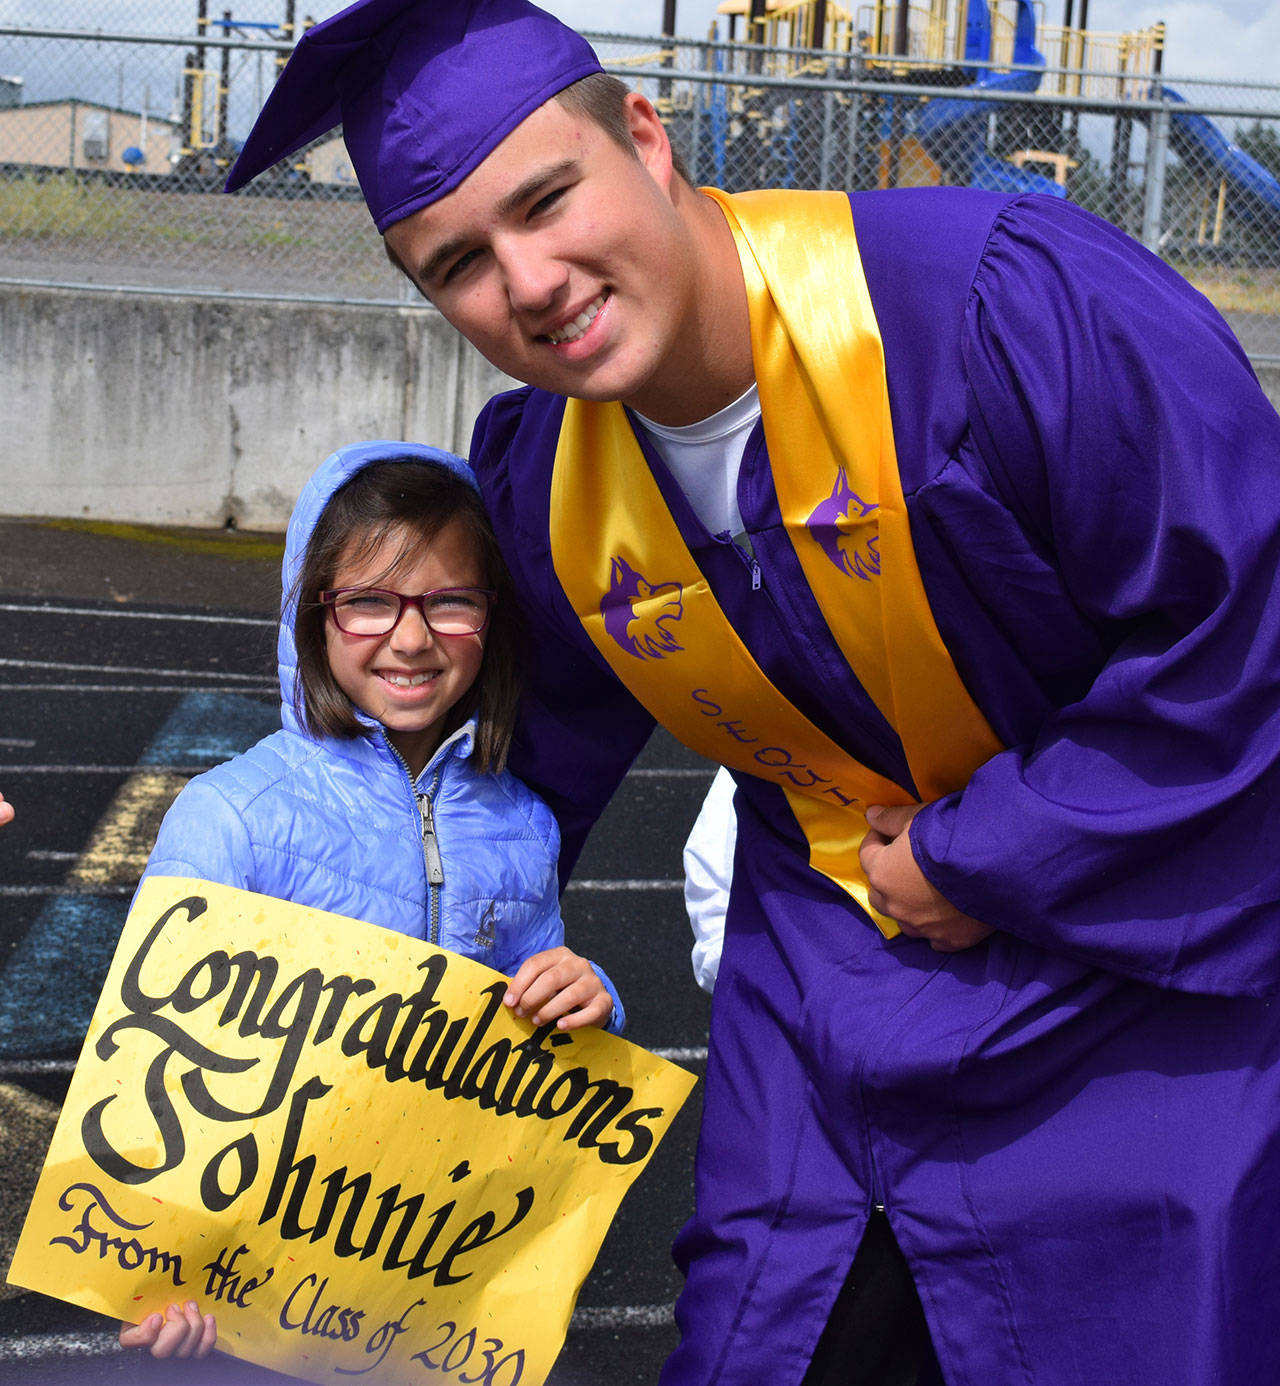 Sequim High School graduate-to-be Johnnie Young gets encouragement from Camryn Corbin, a first-grader in Kelly Miller’s Helen Haller Elementary School class, during the Graduation Walk event on June 7. Young graduated later that day at SHS’s commencement ceremony. Submitted photo